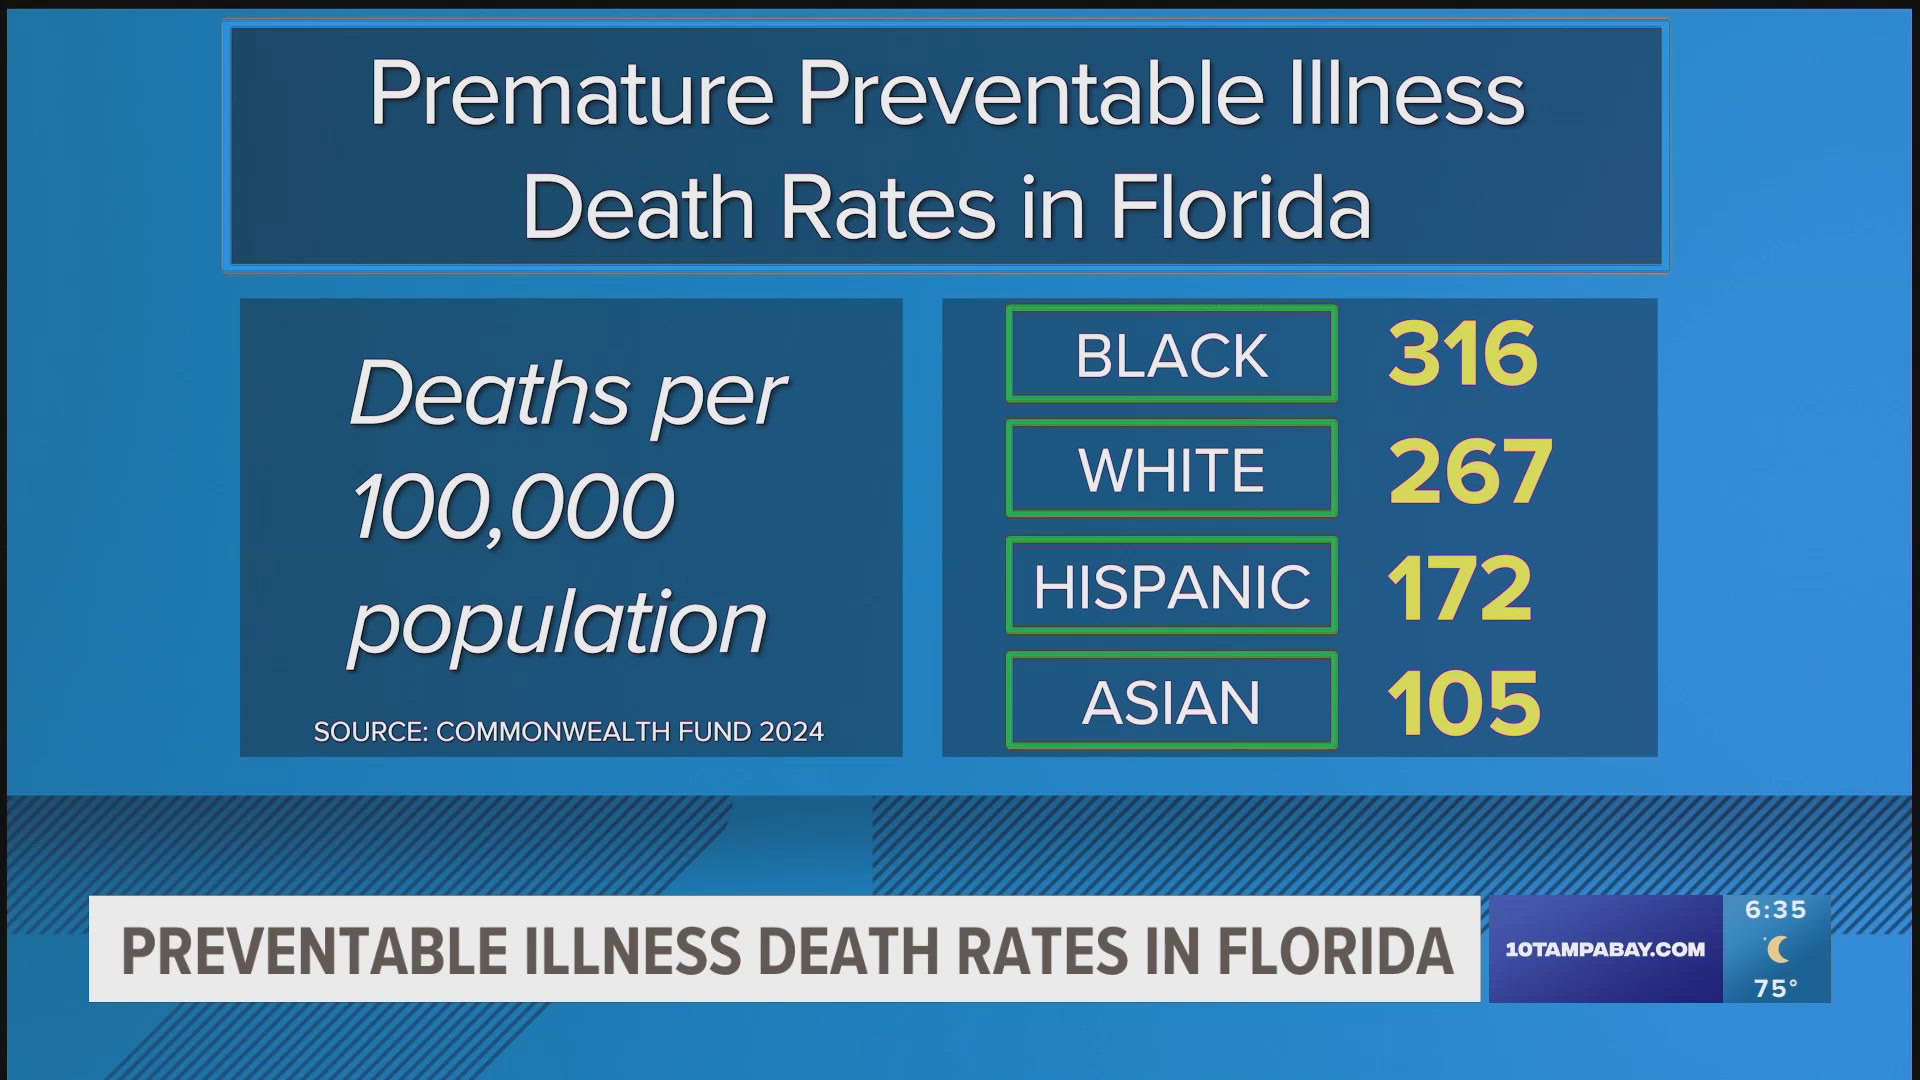 Preventable illnesses were responsible for over 300 deaths per 100,000 Black Floridians, which is higher than any other racial demographic.